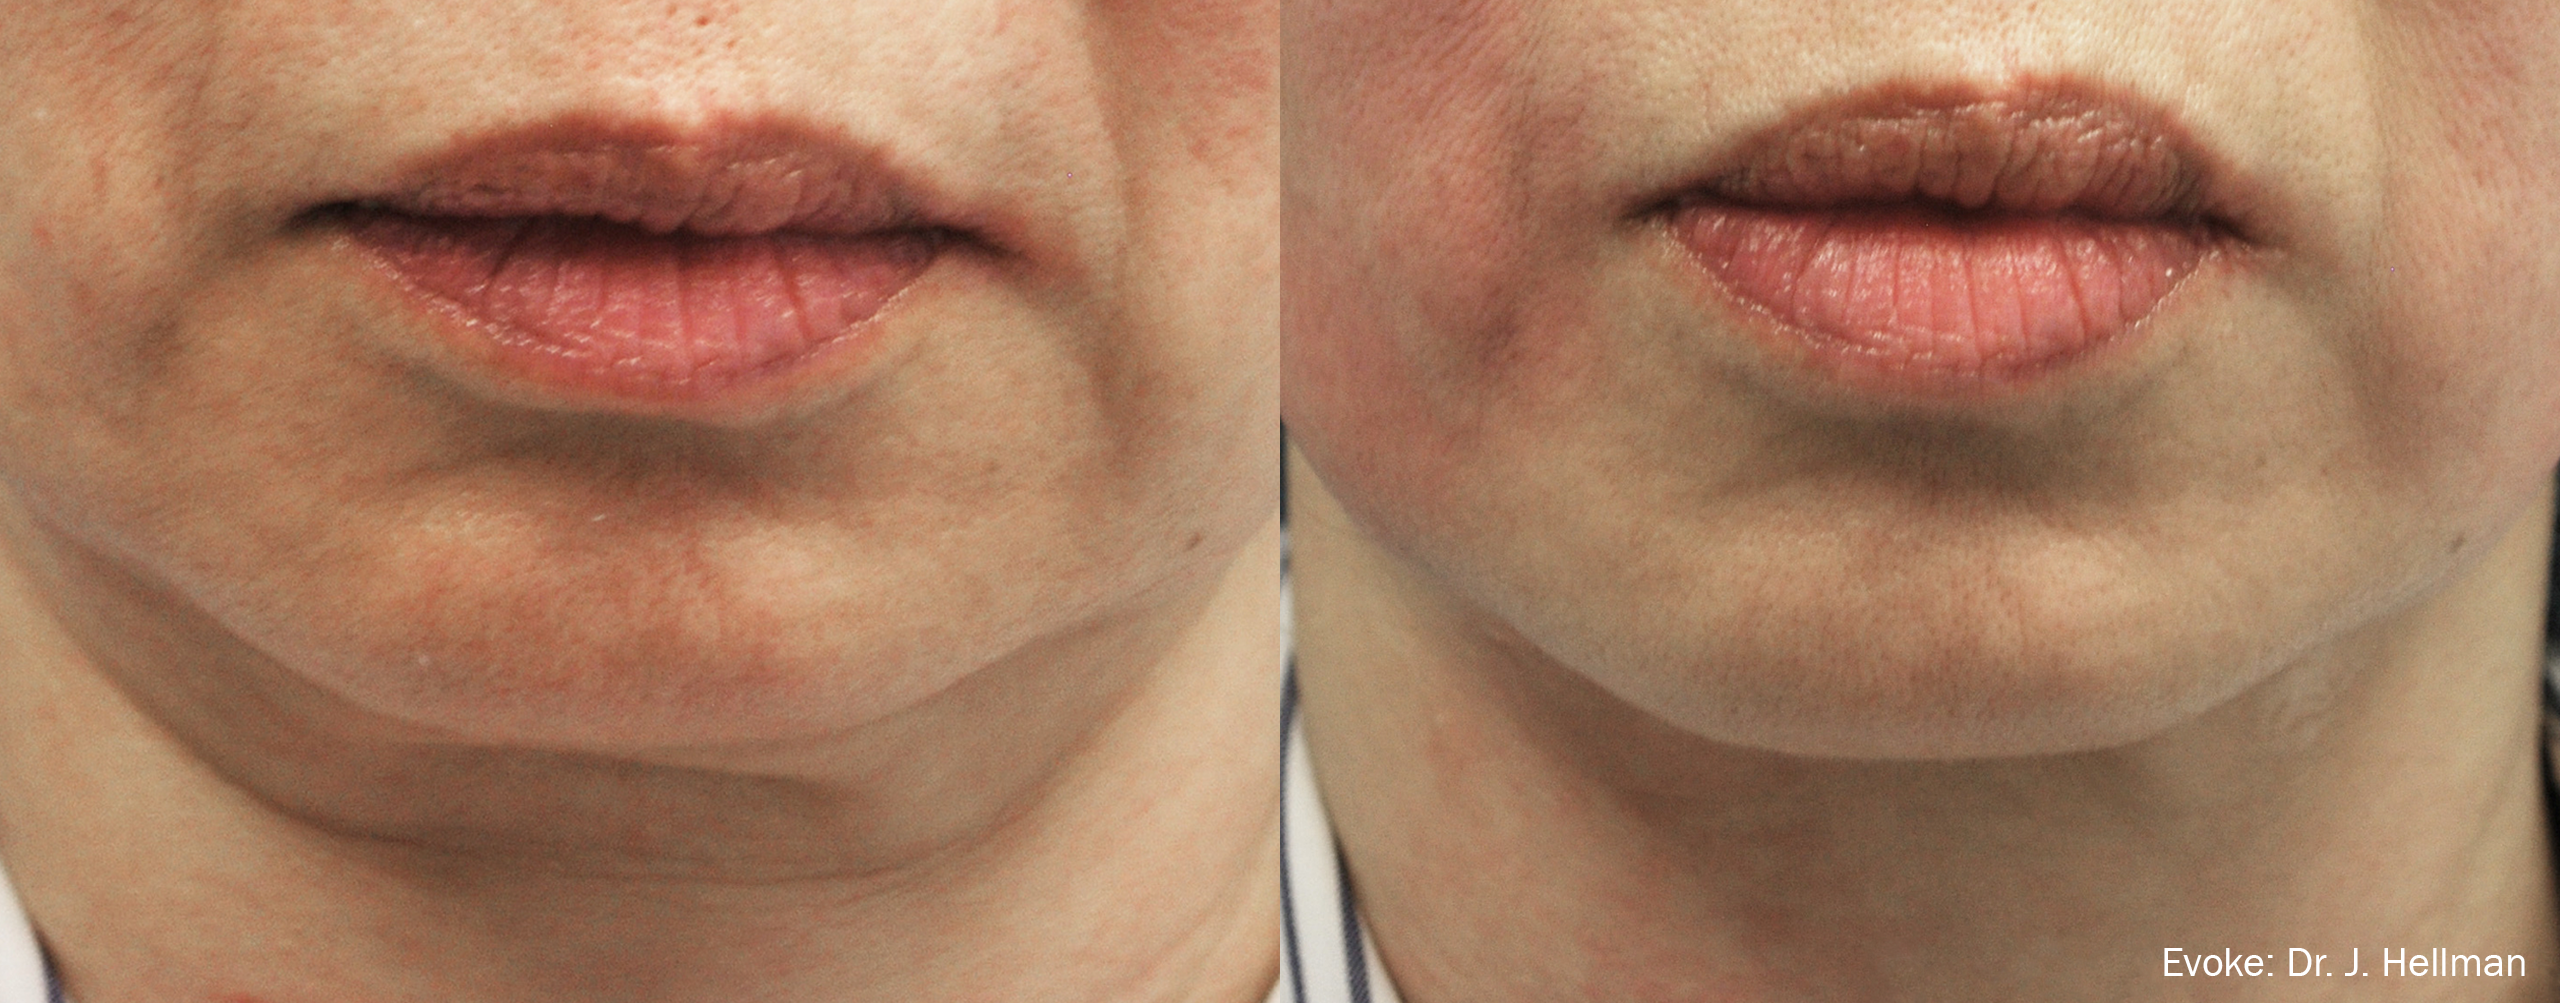  Evoke on Jowls Before and After image